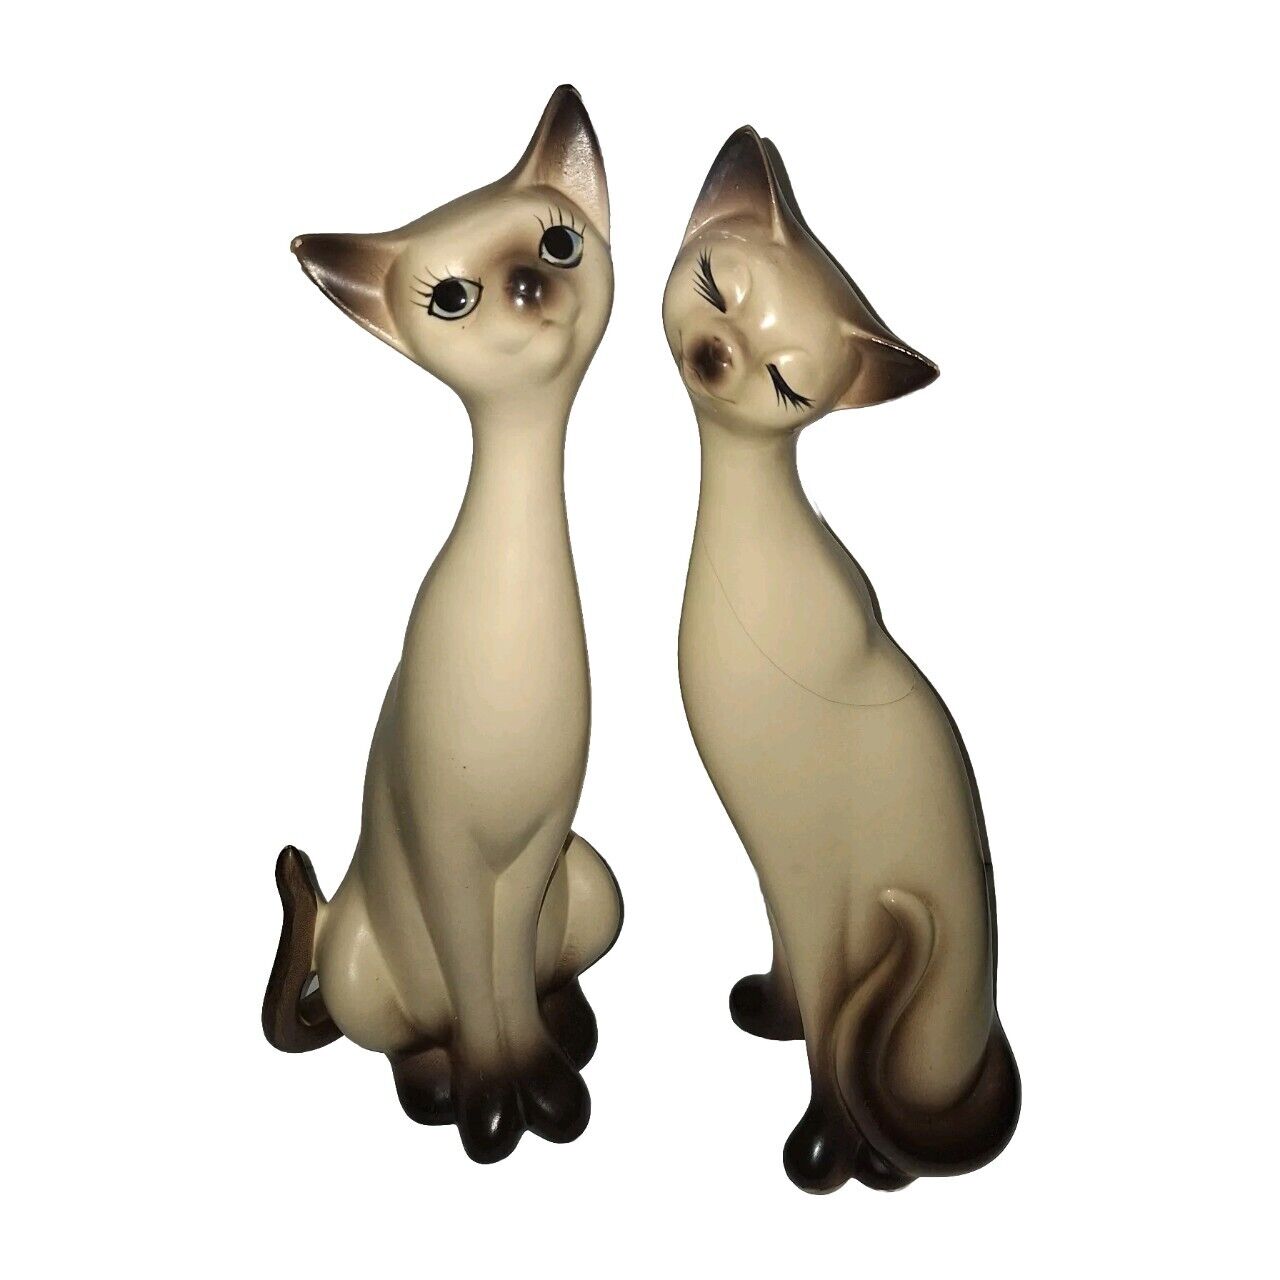 Vintage Napcoware Large Tall Porcelain Siamese Cats Japan Kitschy